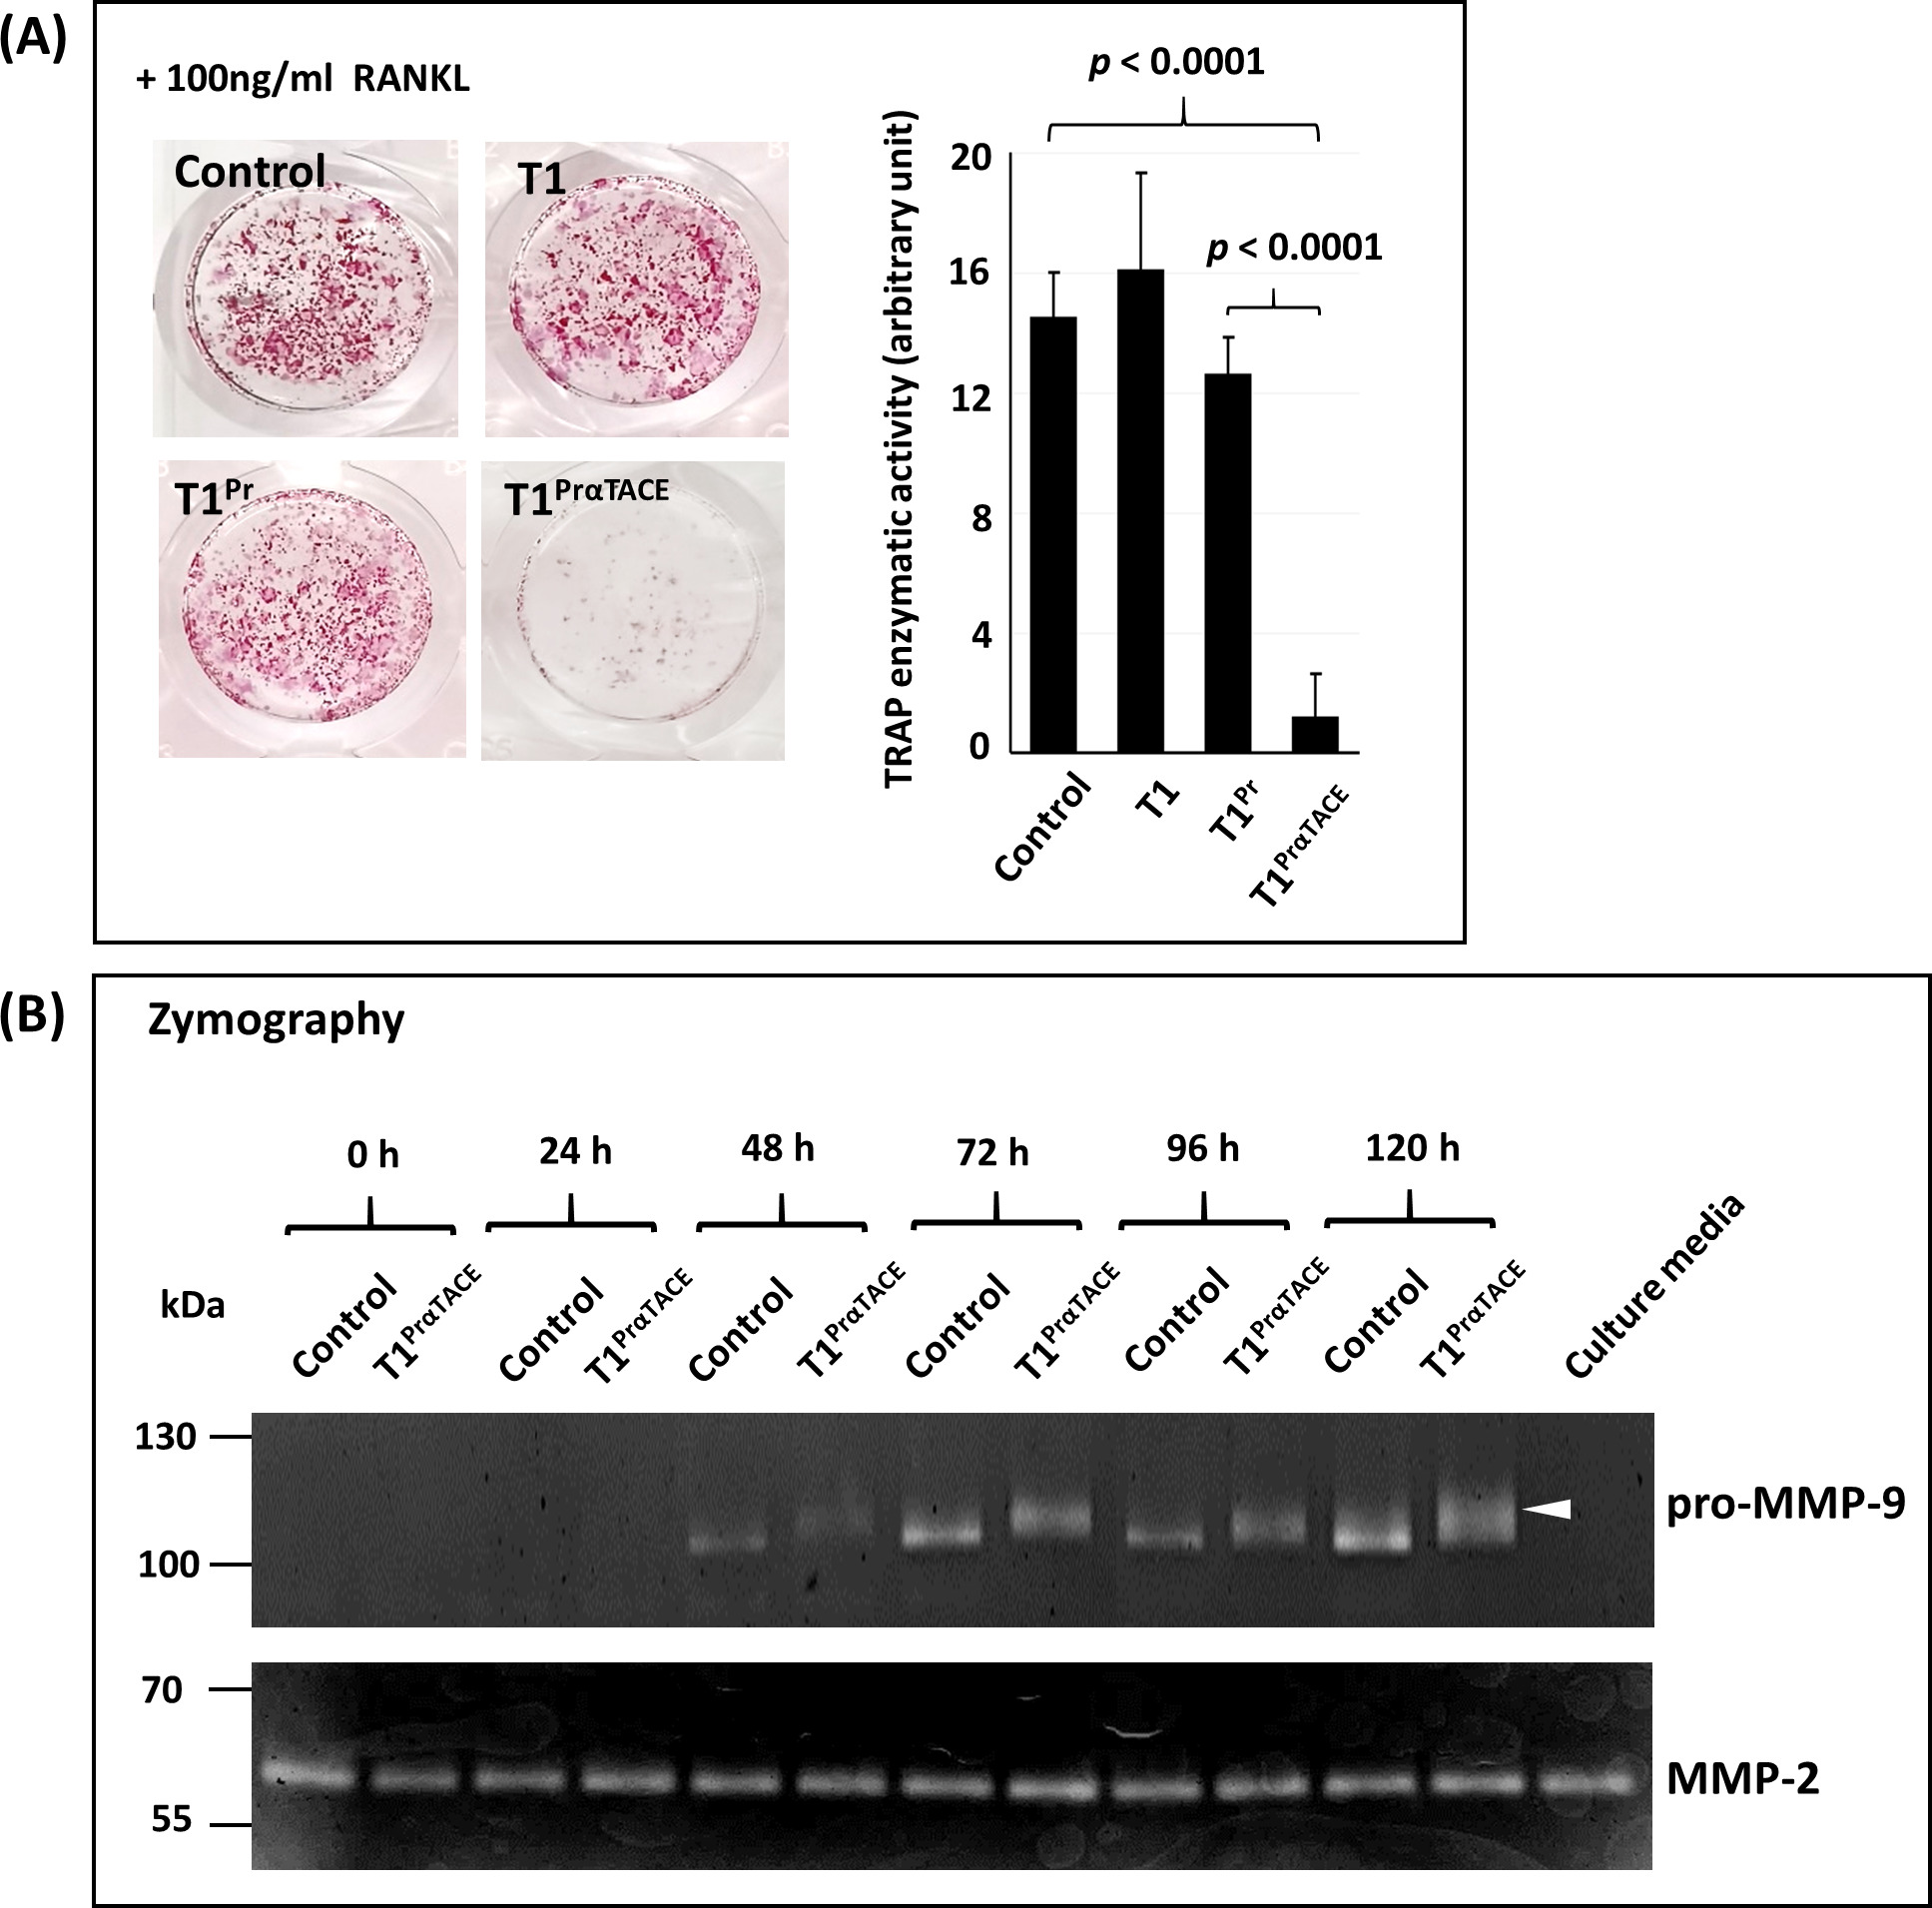 Fig. 4 
            T1PrαTACE inhibited tartrate-resistant acid phosphatase (TRAP) expression and matrix metalloproteinase (MMP)-9 maturation in osteoclast progenitor cells. a) RAW264.7 progenitor cells transduced with T1PrαTACE exhibited a > 90% lower TRAP staining (left) and activity (right) than the other tissue inhibitor of metalloproteinases (TIMP) variants. b) Gelatin zymography analysis of the conditioned media revealed that MMP-9 expressed in T1PrαTACE cells existed mainly in a zymogen form (102 kDa; highlighted by arrowhead), which migrated at a slower pace than matured MMP-9 (92 kDa). Note: the MMP-2 band in the culture media (last lane) originated from fetal bovine serum added to α-minimum essential medium (5%). RANKL, receptor activator of nuclear factor kappa-Β ligand. Statistical significance was determined by analysis of variance.
          